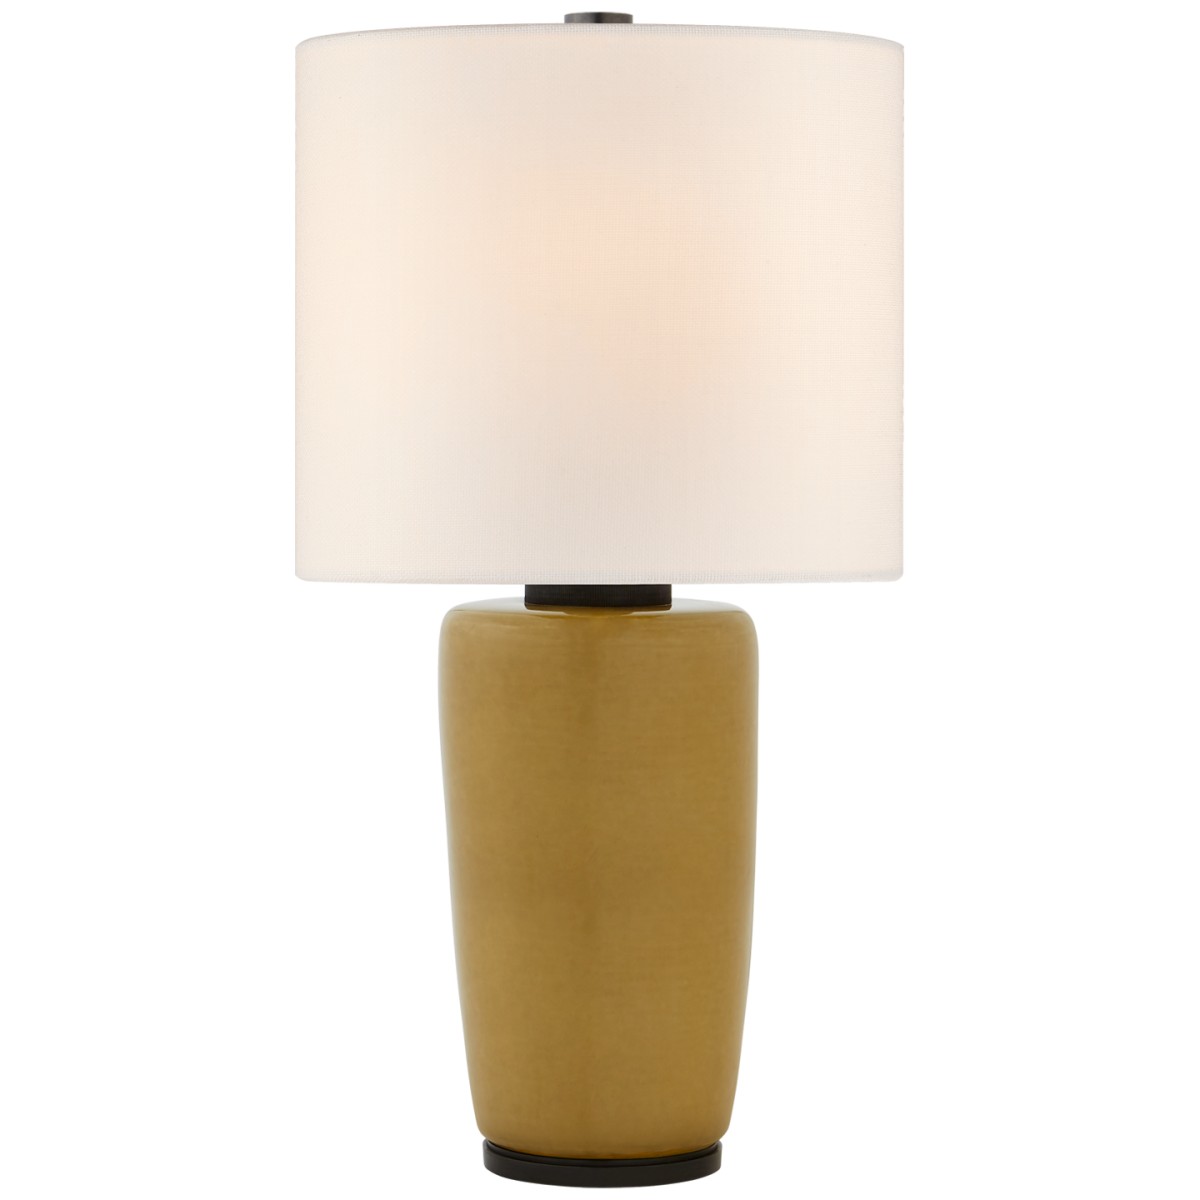 Chado Large Table Lamp with Linen Shade